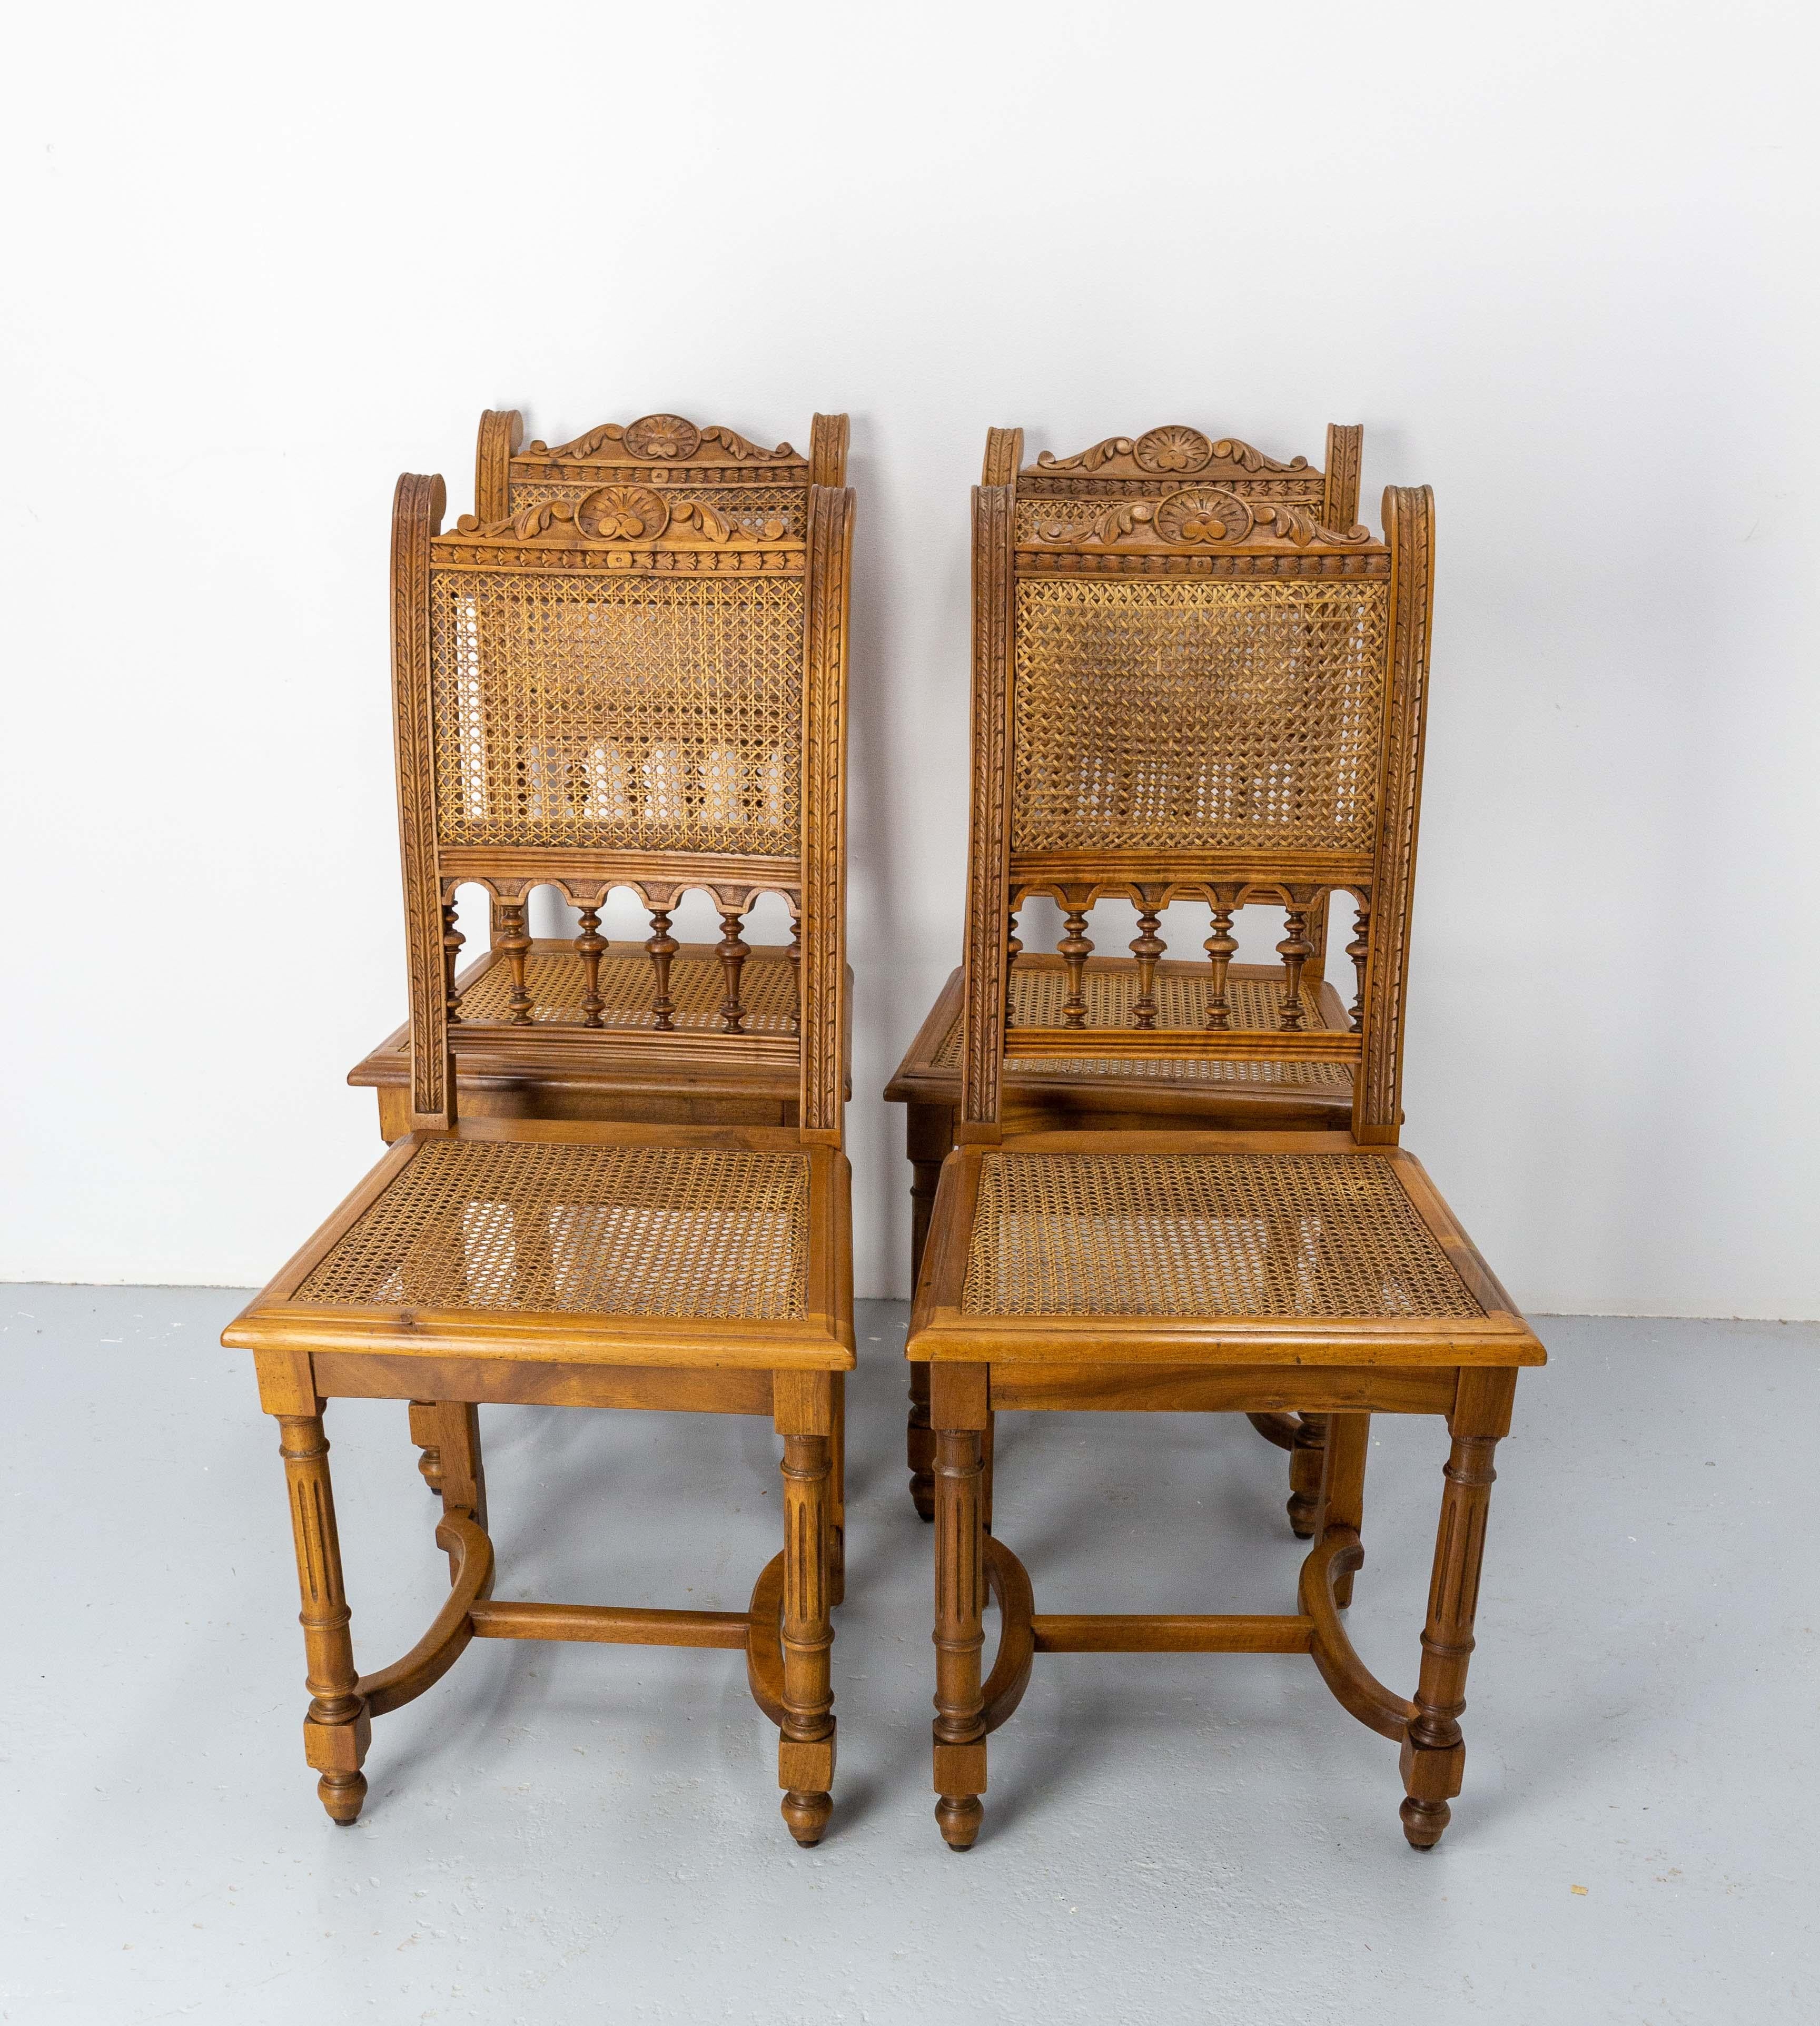 Four French chairs in the Louis 13 style.
Walnut and cane.
Good condition.

Shipping :
67 / 90 / 95 cm 16 kg.